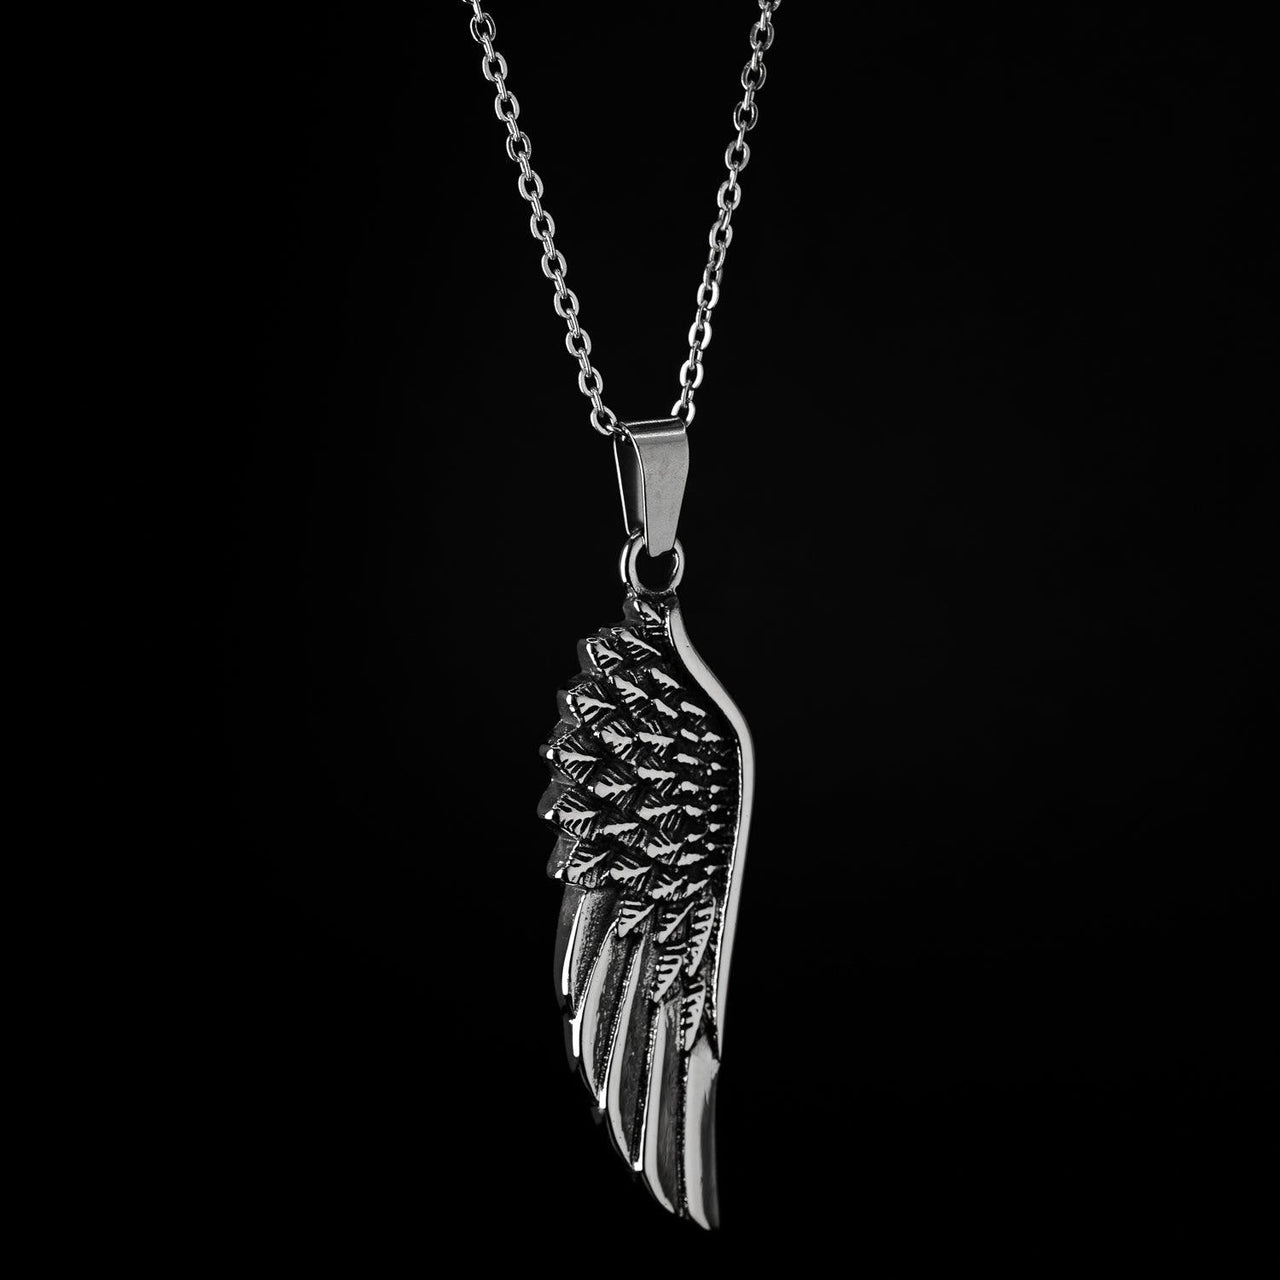 Raven Wing Pendant by Black Feather Design